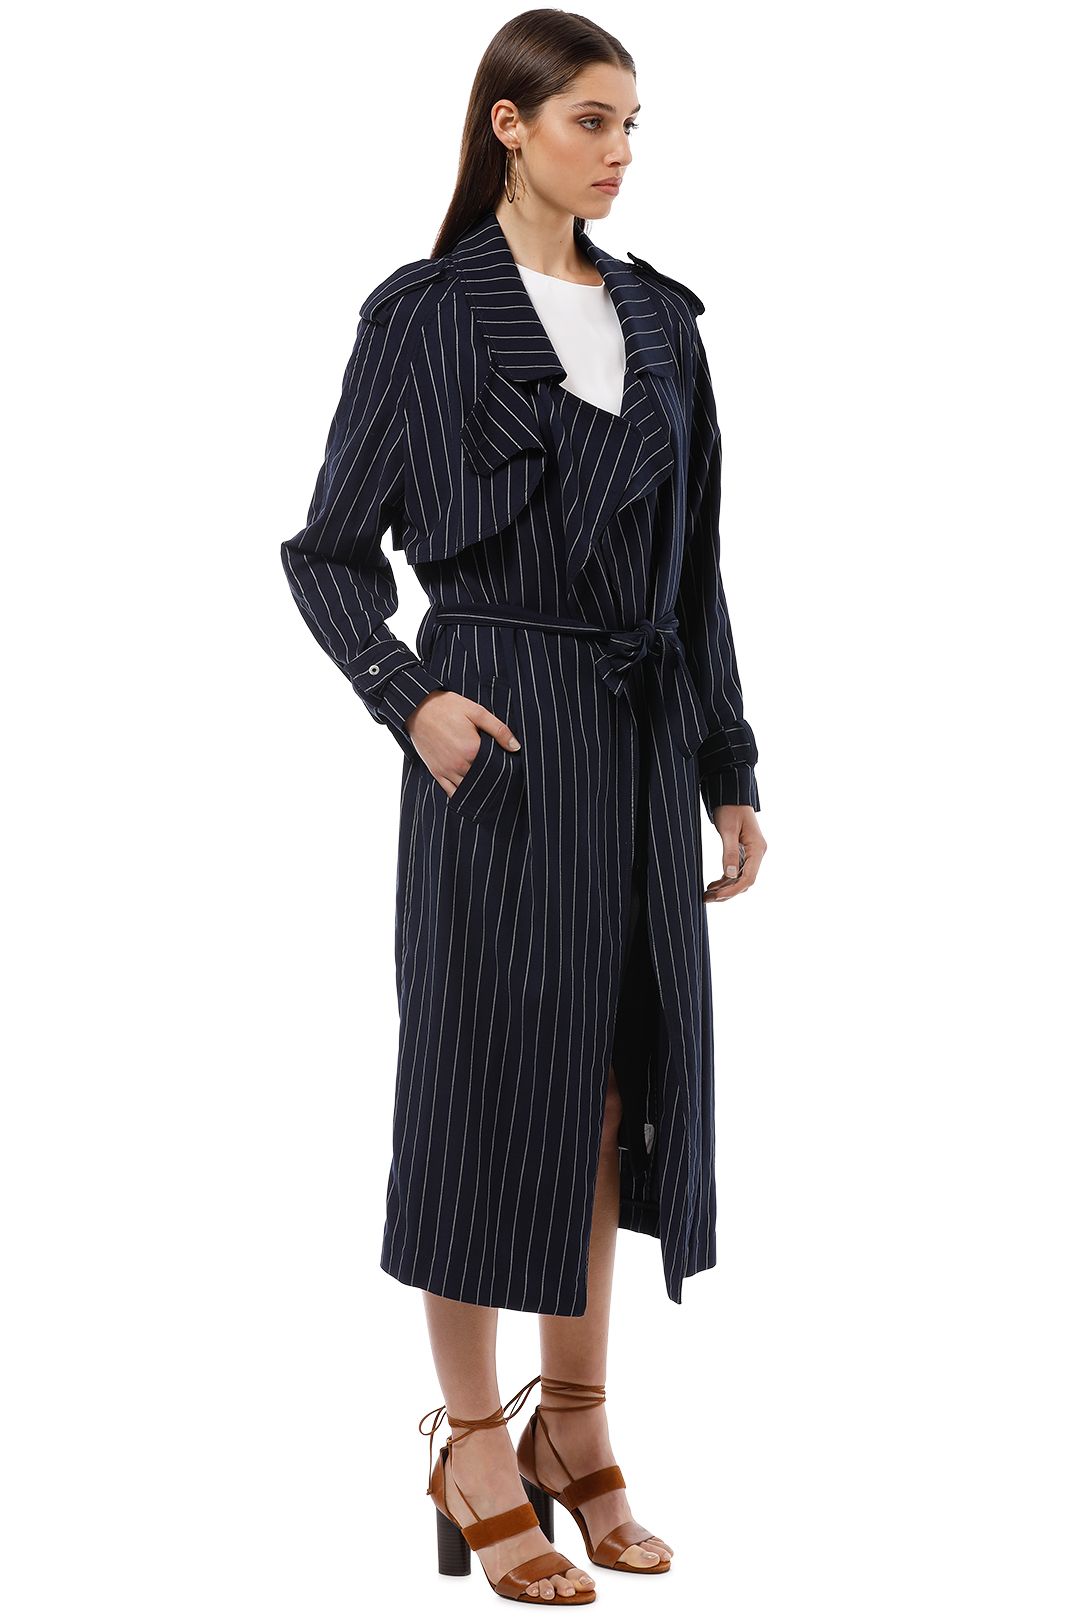 Camilla and Marc - Franca Trench - Navy - Side